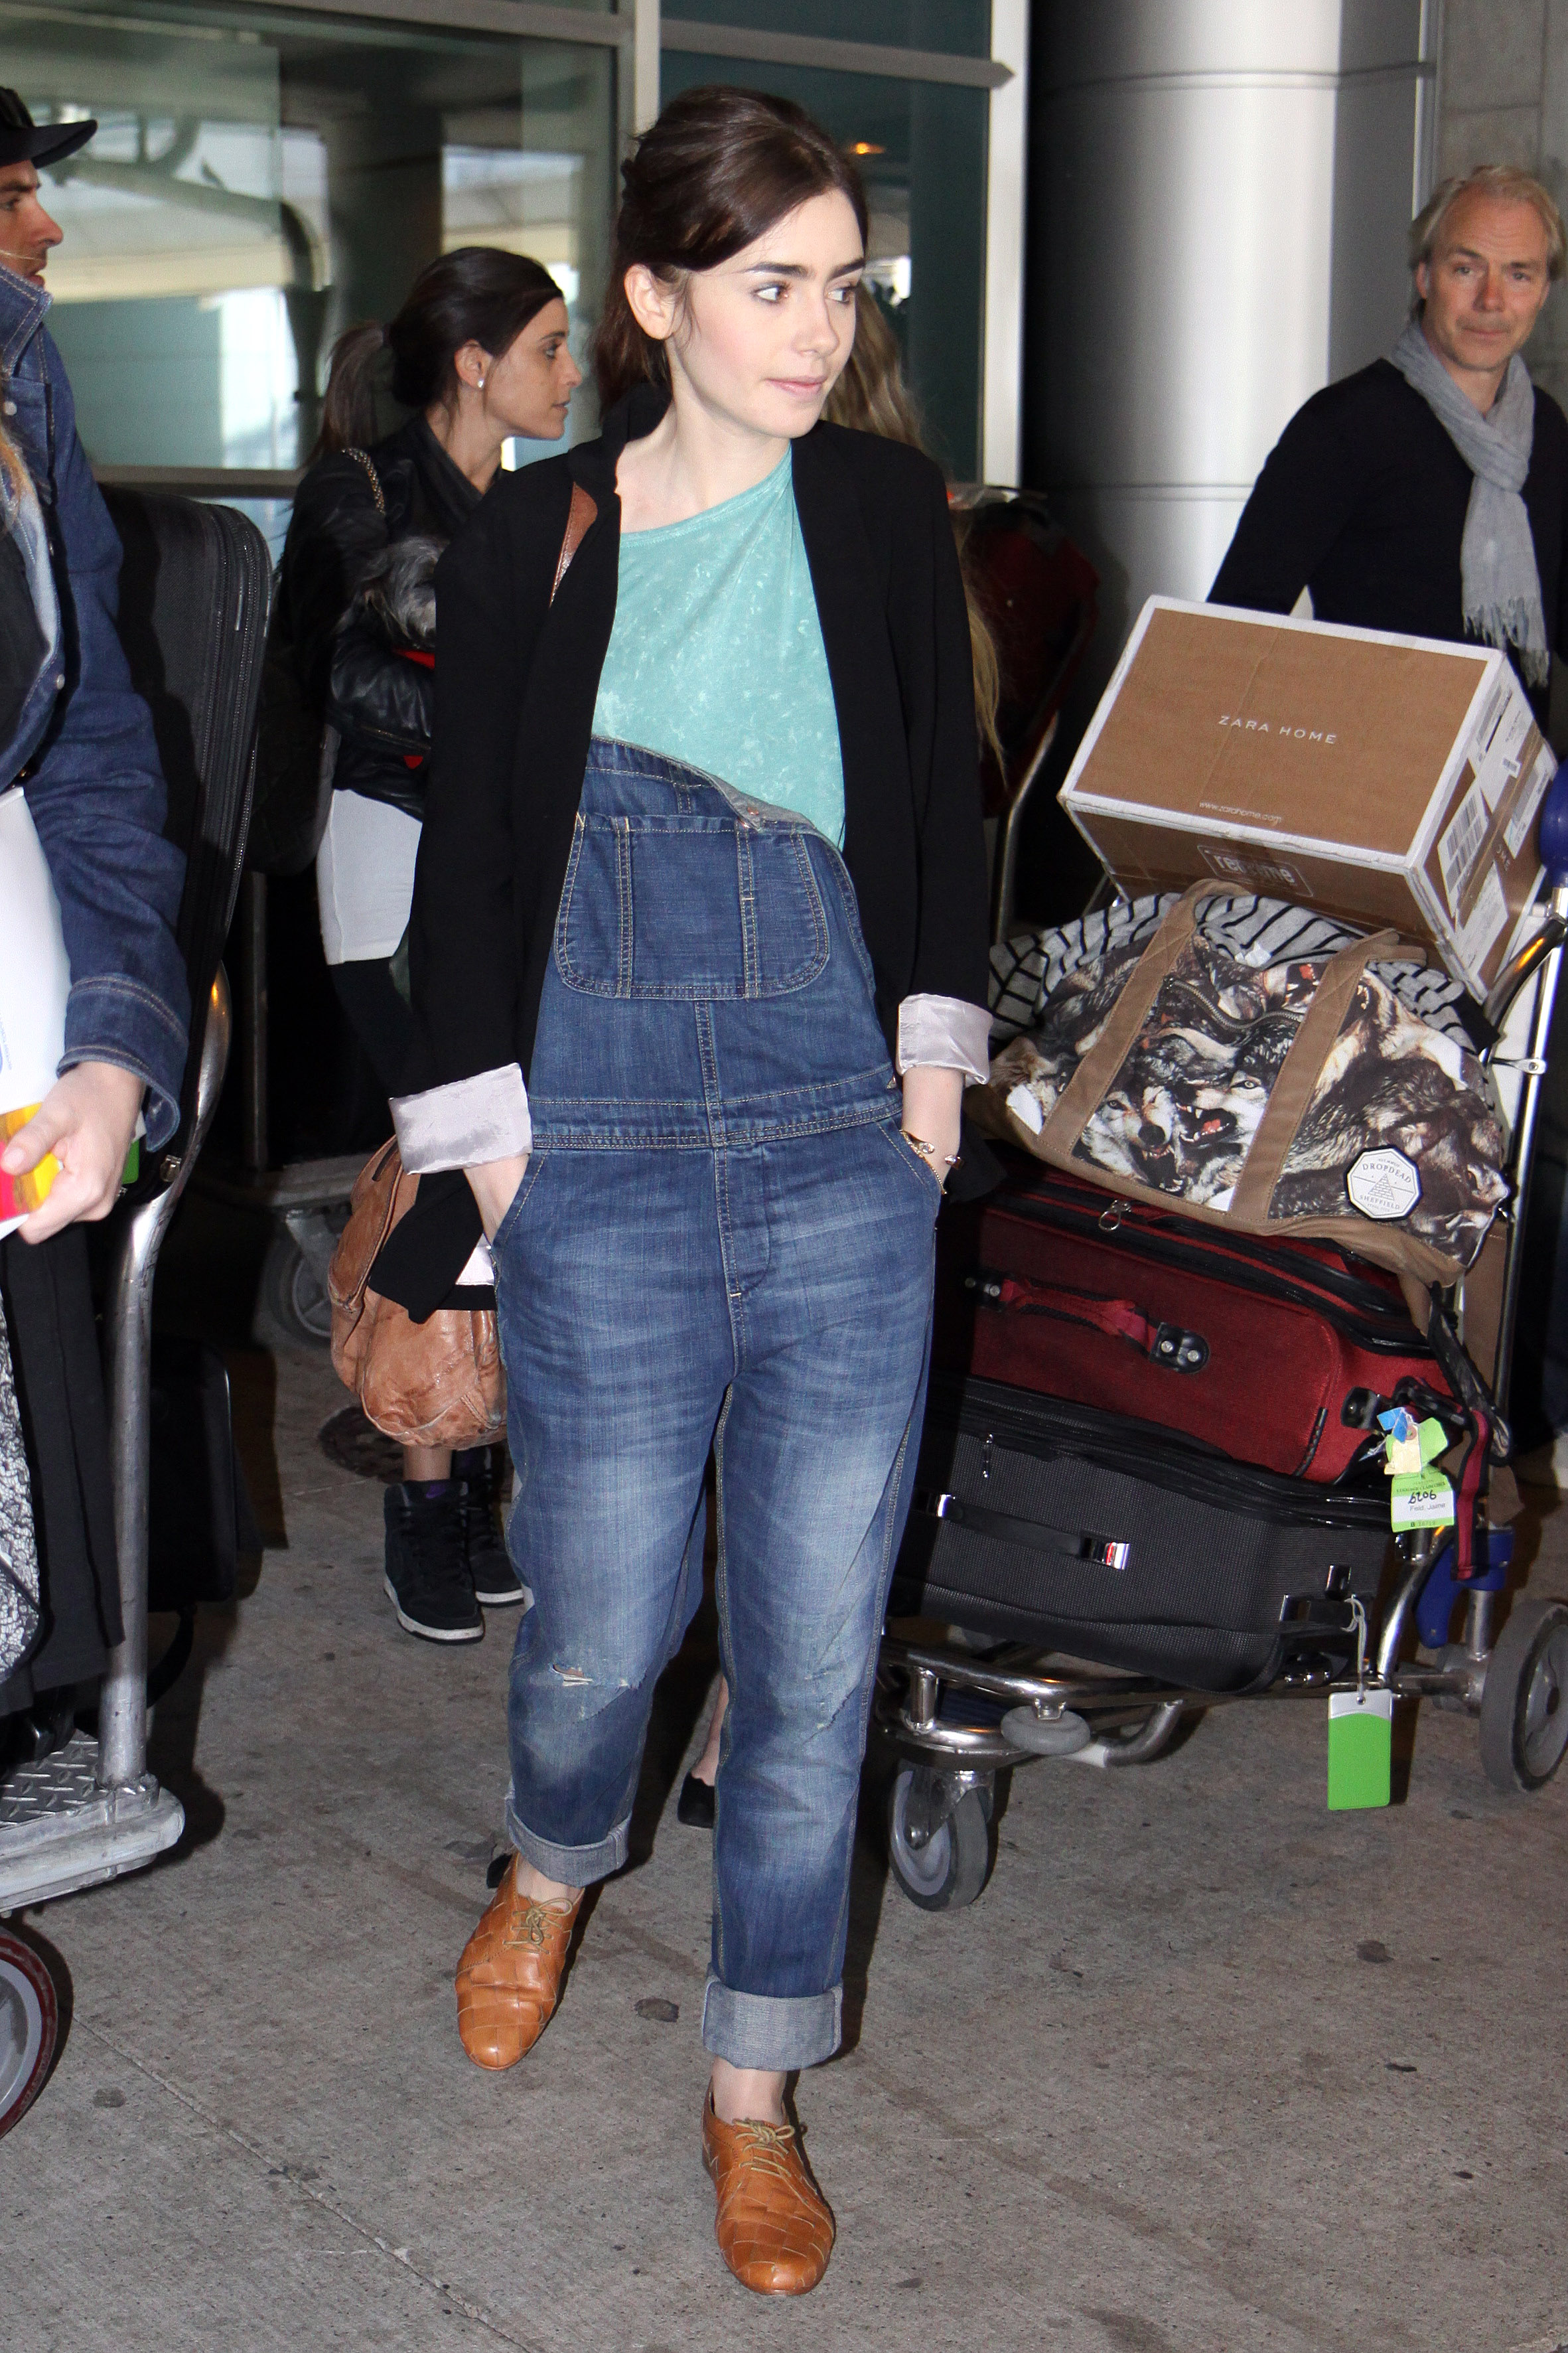 Lily Collins, Jamie Campbell Bower and 'Mortal Instruments' cast arrive in Toronto for Canadian Premiere